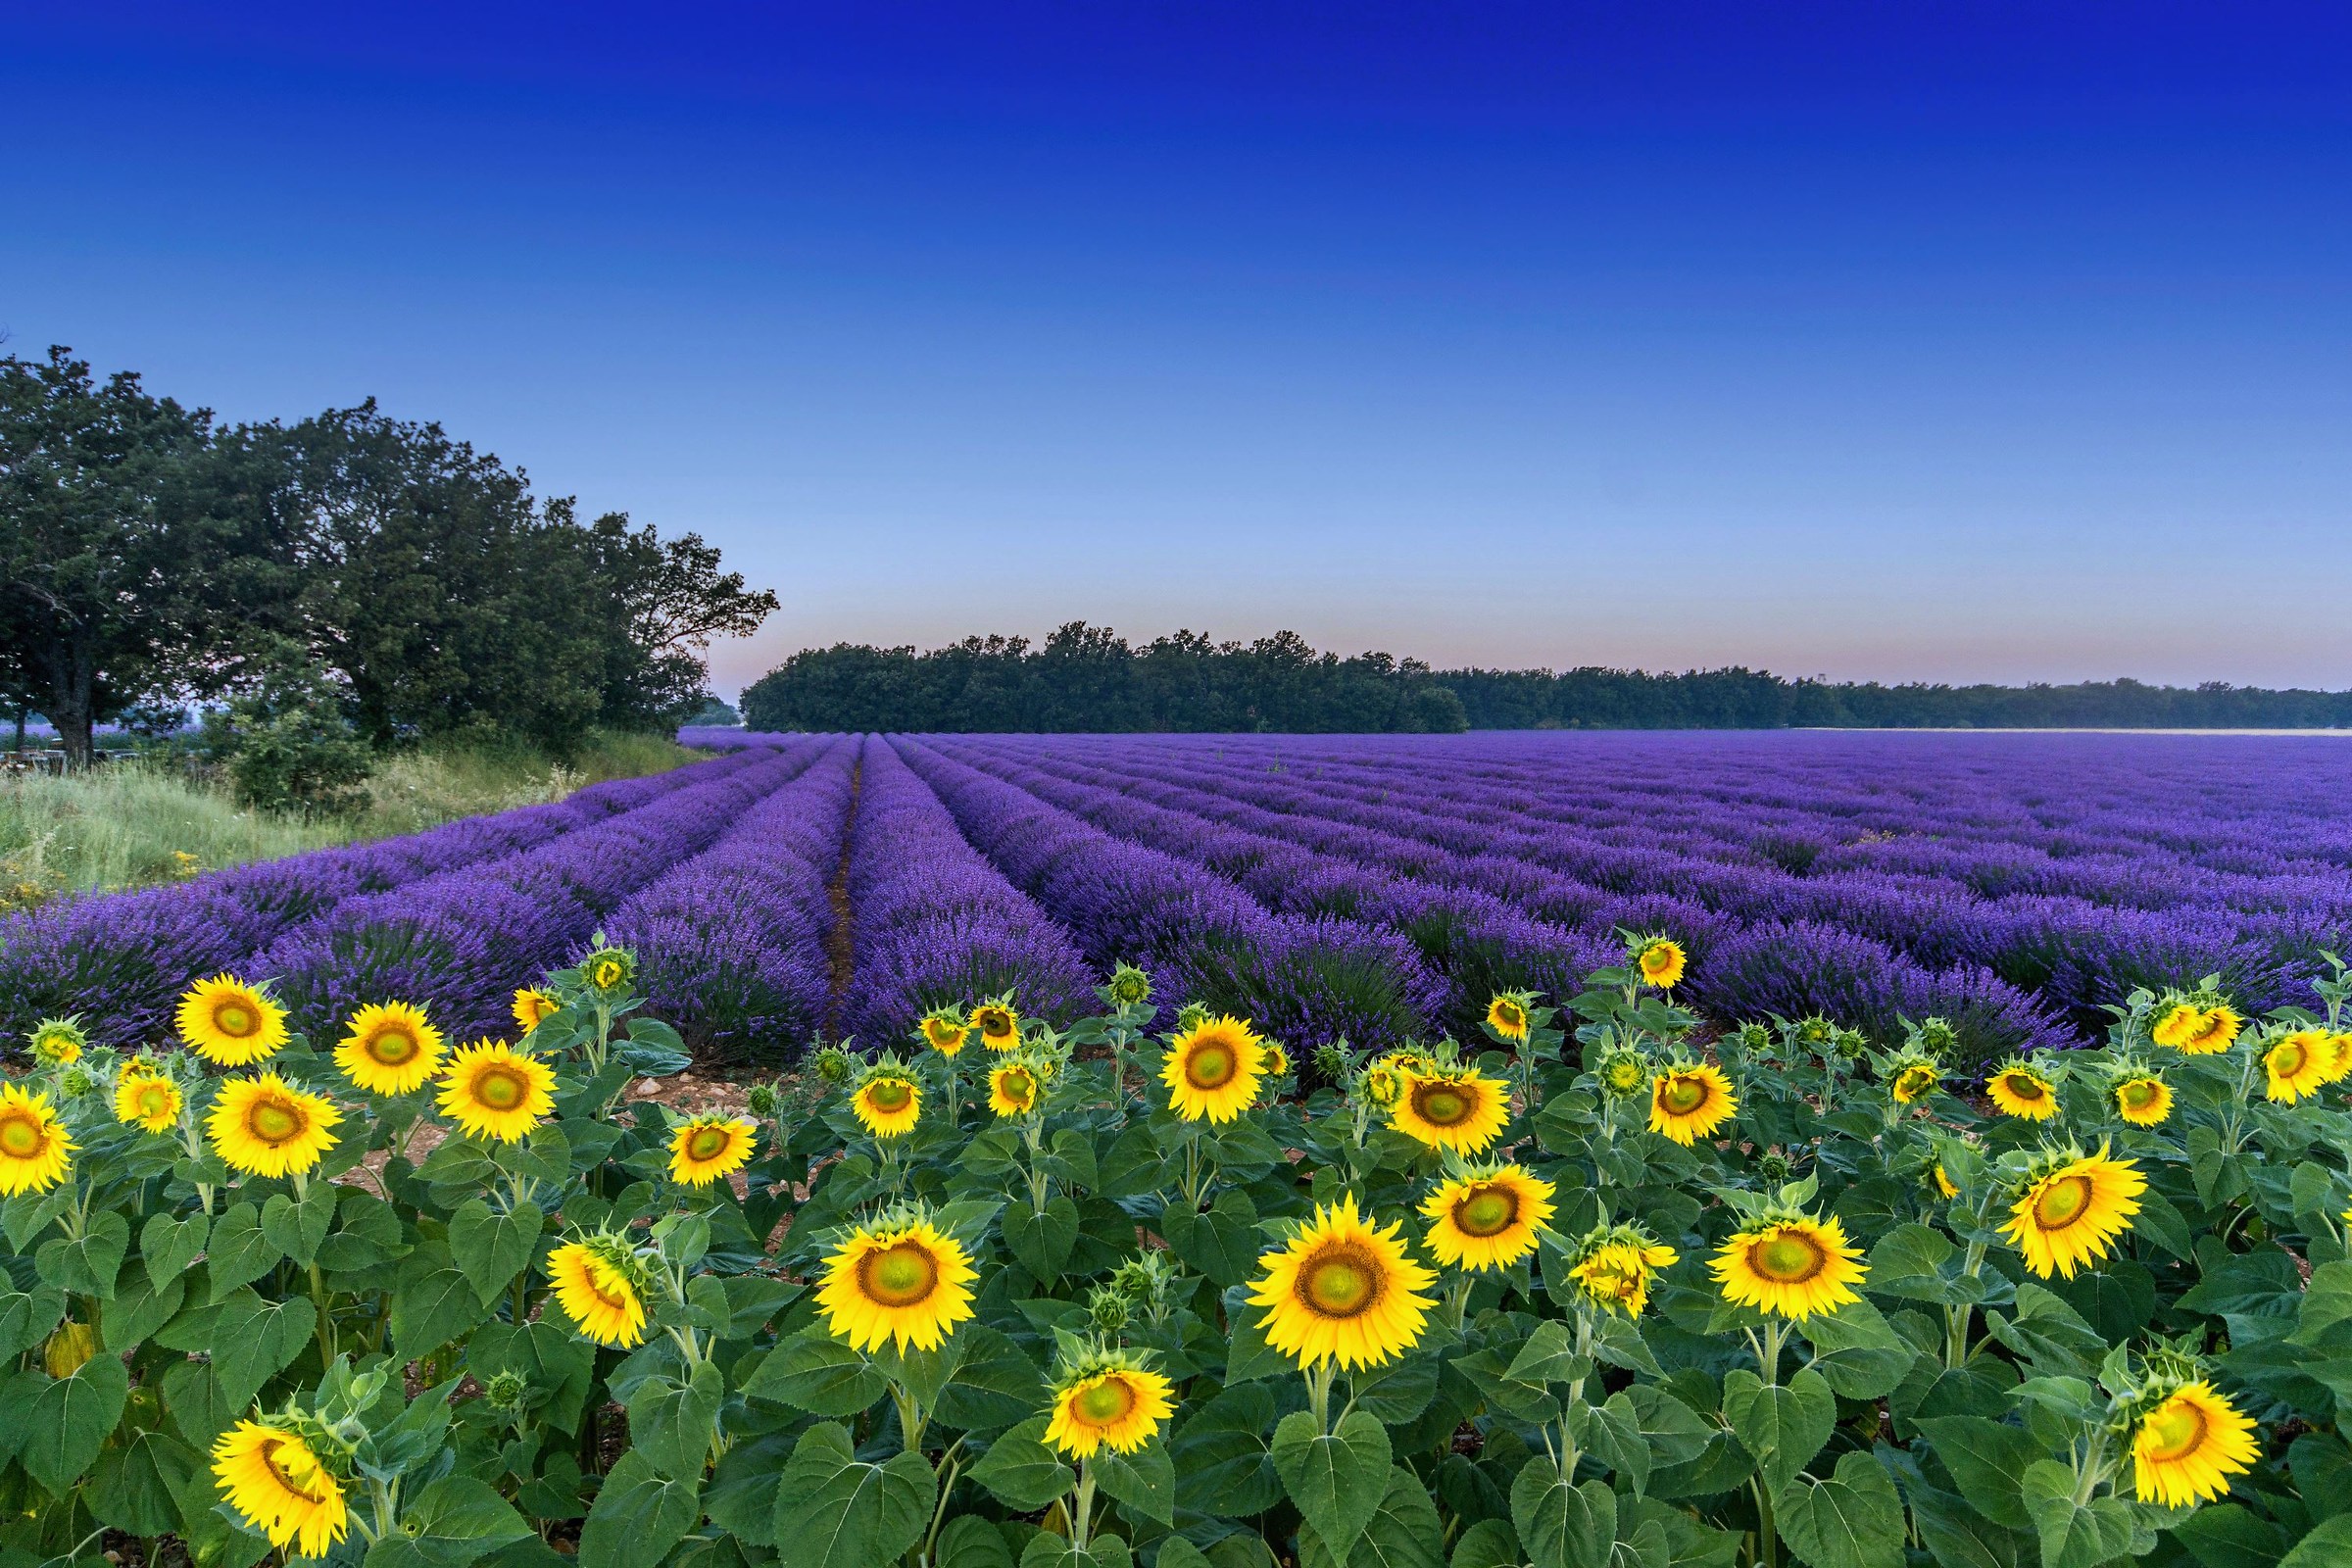 Sunflowers and Lavender at Valensole...